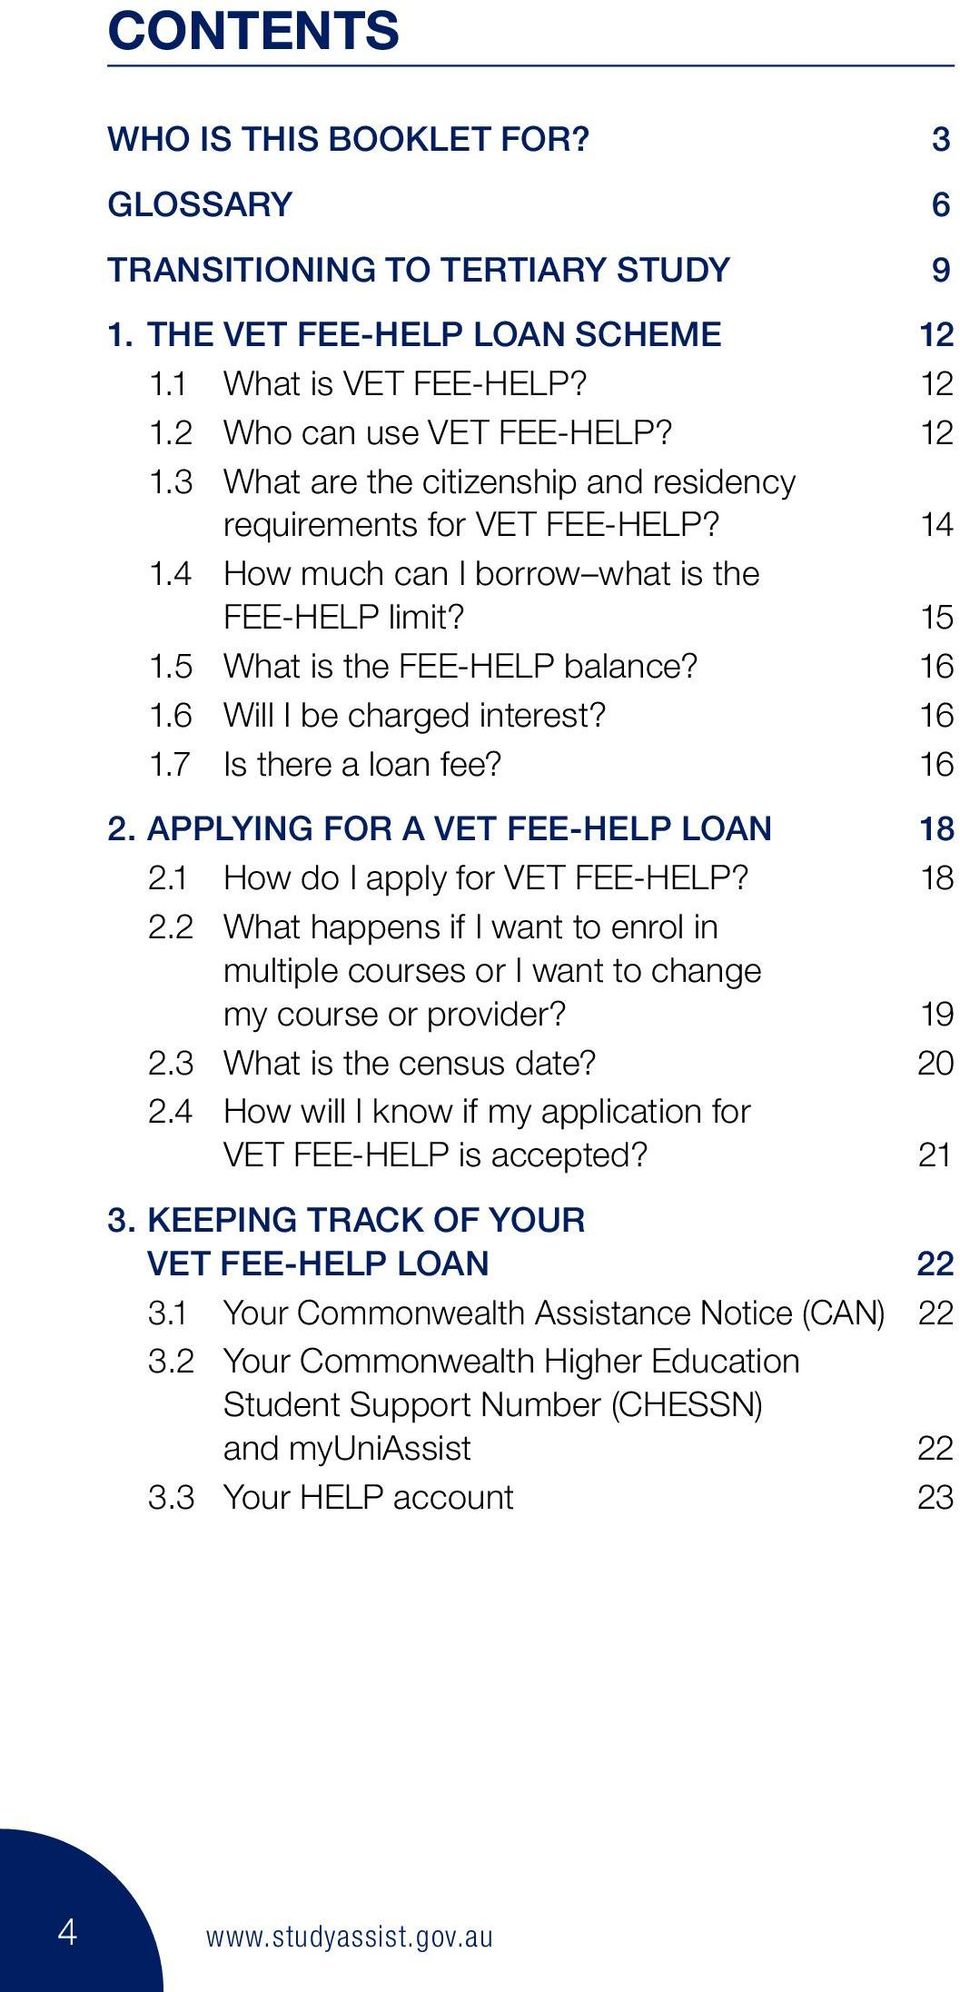 APPLYING FOR A VET FEE-HELP LOAN 18 2.1 How do I apply for VET FEE-HELP? 18 2.2 What happens if I want to enrol in multiple courses or I want to change my course or provider? 19 2.